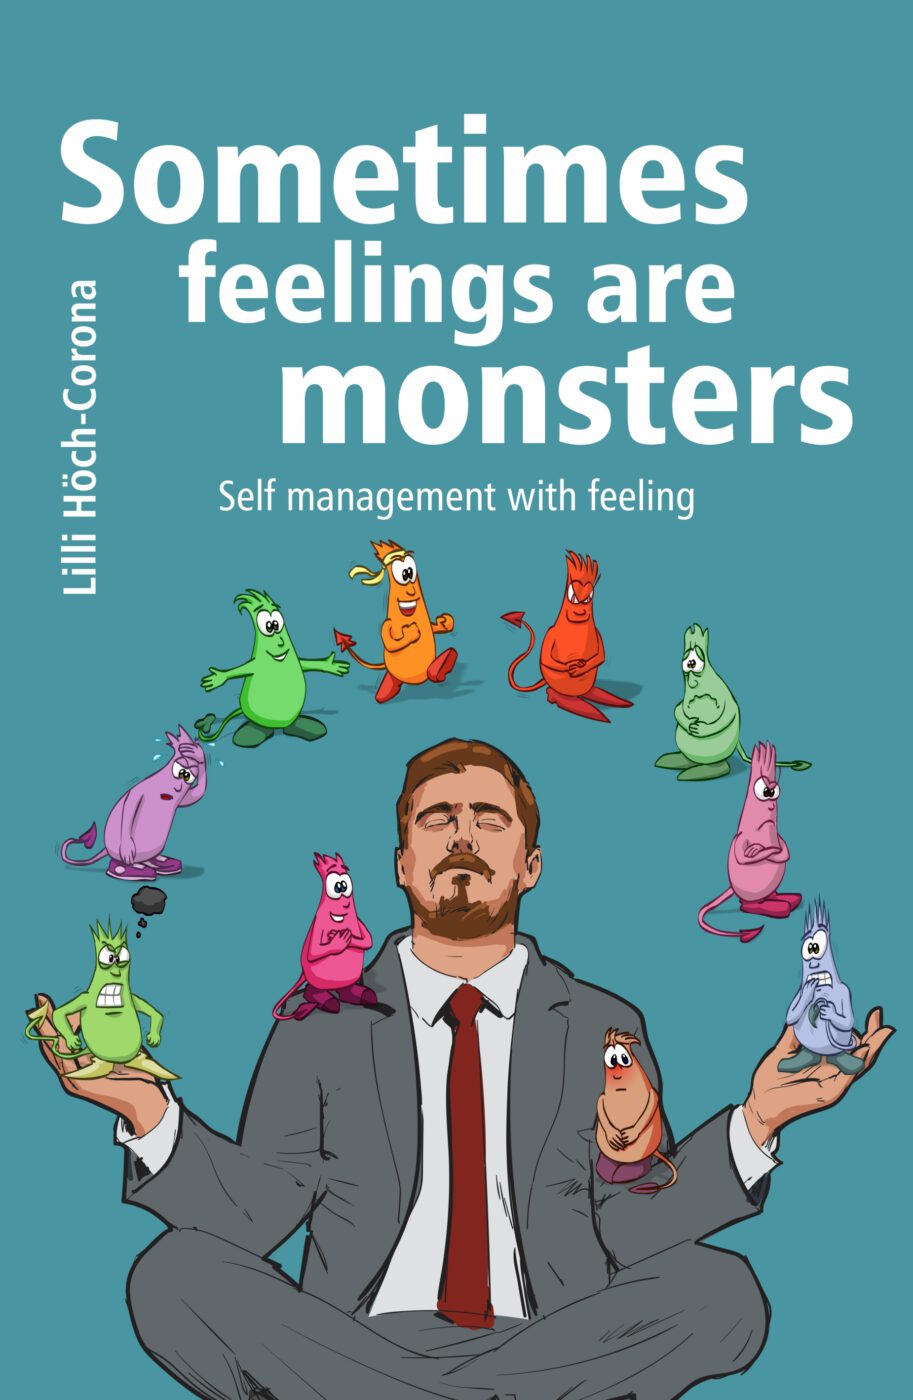 Sometimes feelings are monsters Buch Cover